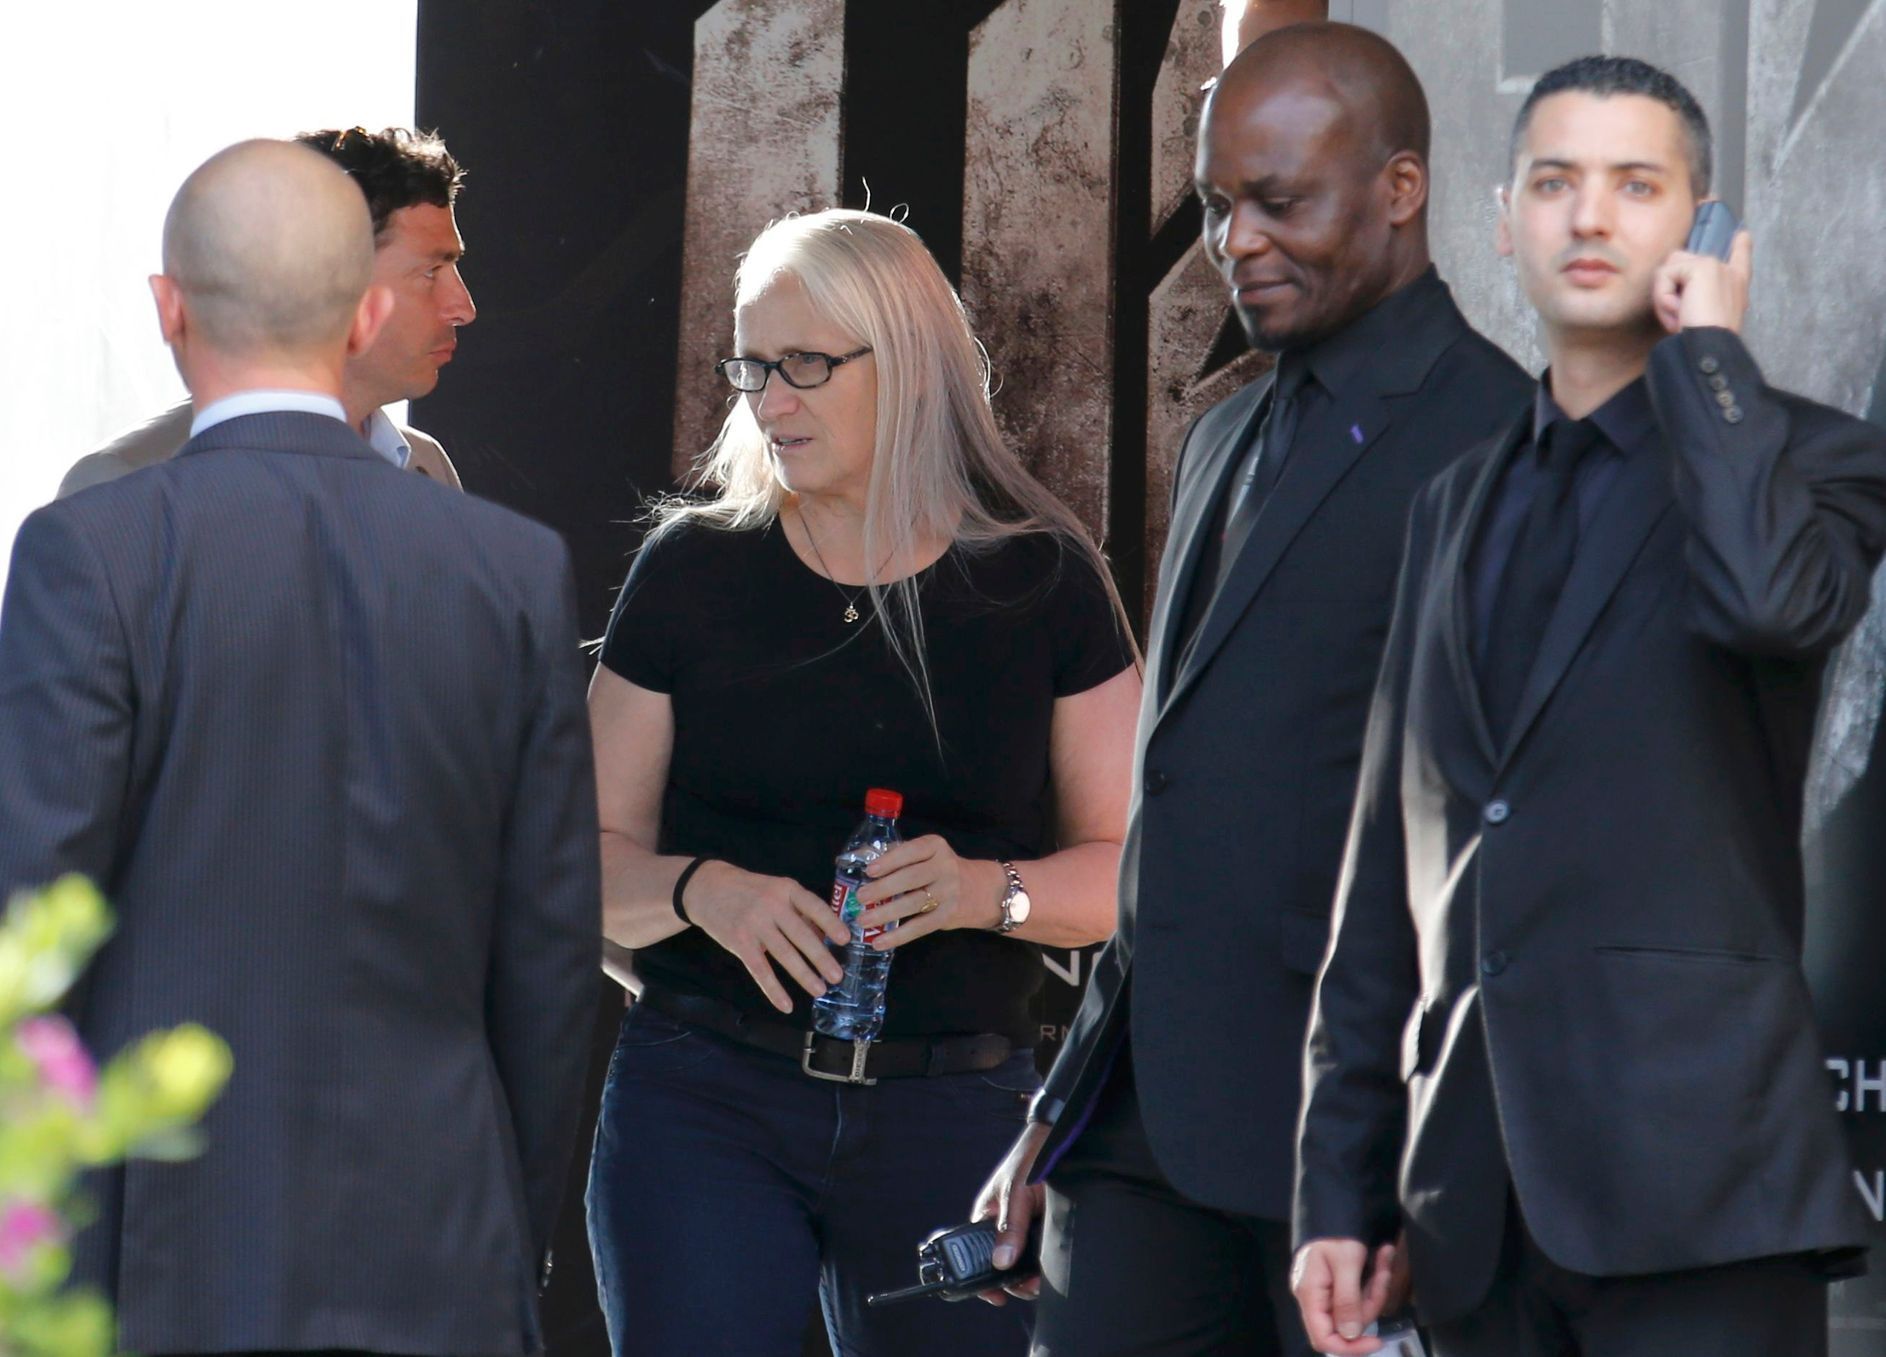 Director Jane Campion, Jury President of the 67th Cannes Film Festival, arrives at the Carlton Hotel before the start of the Festival in Cannes